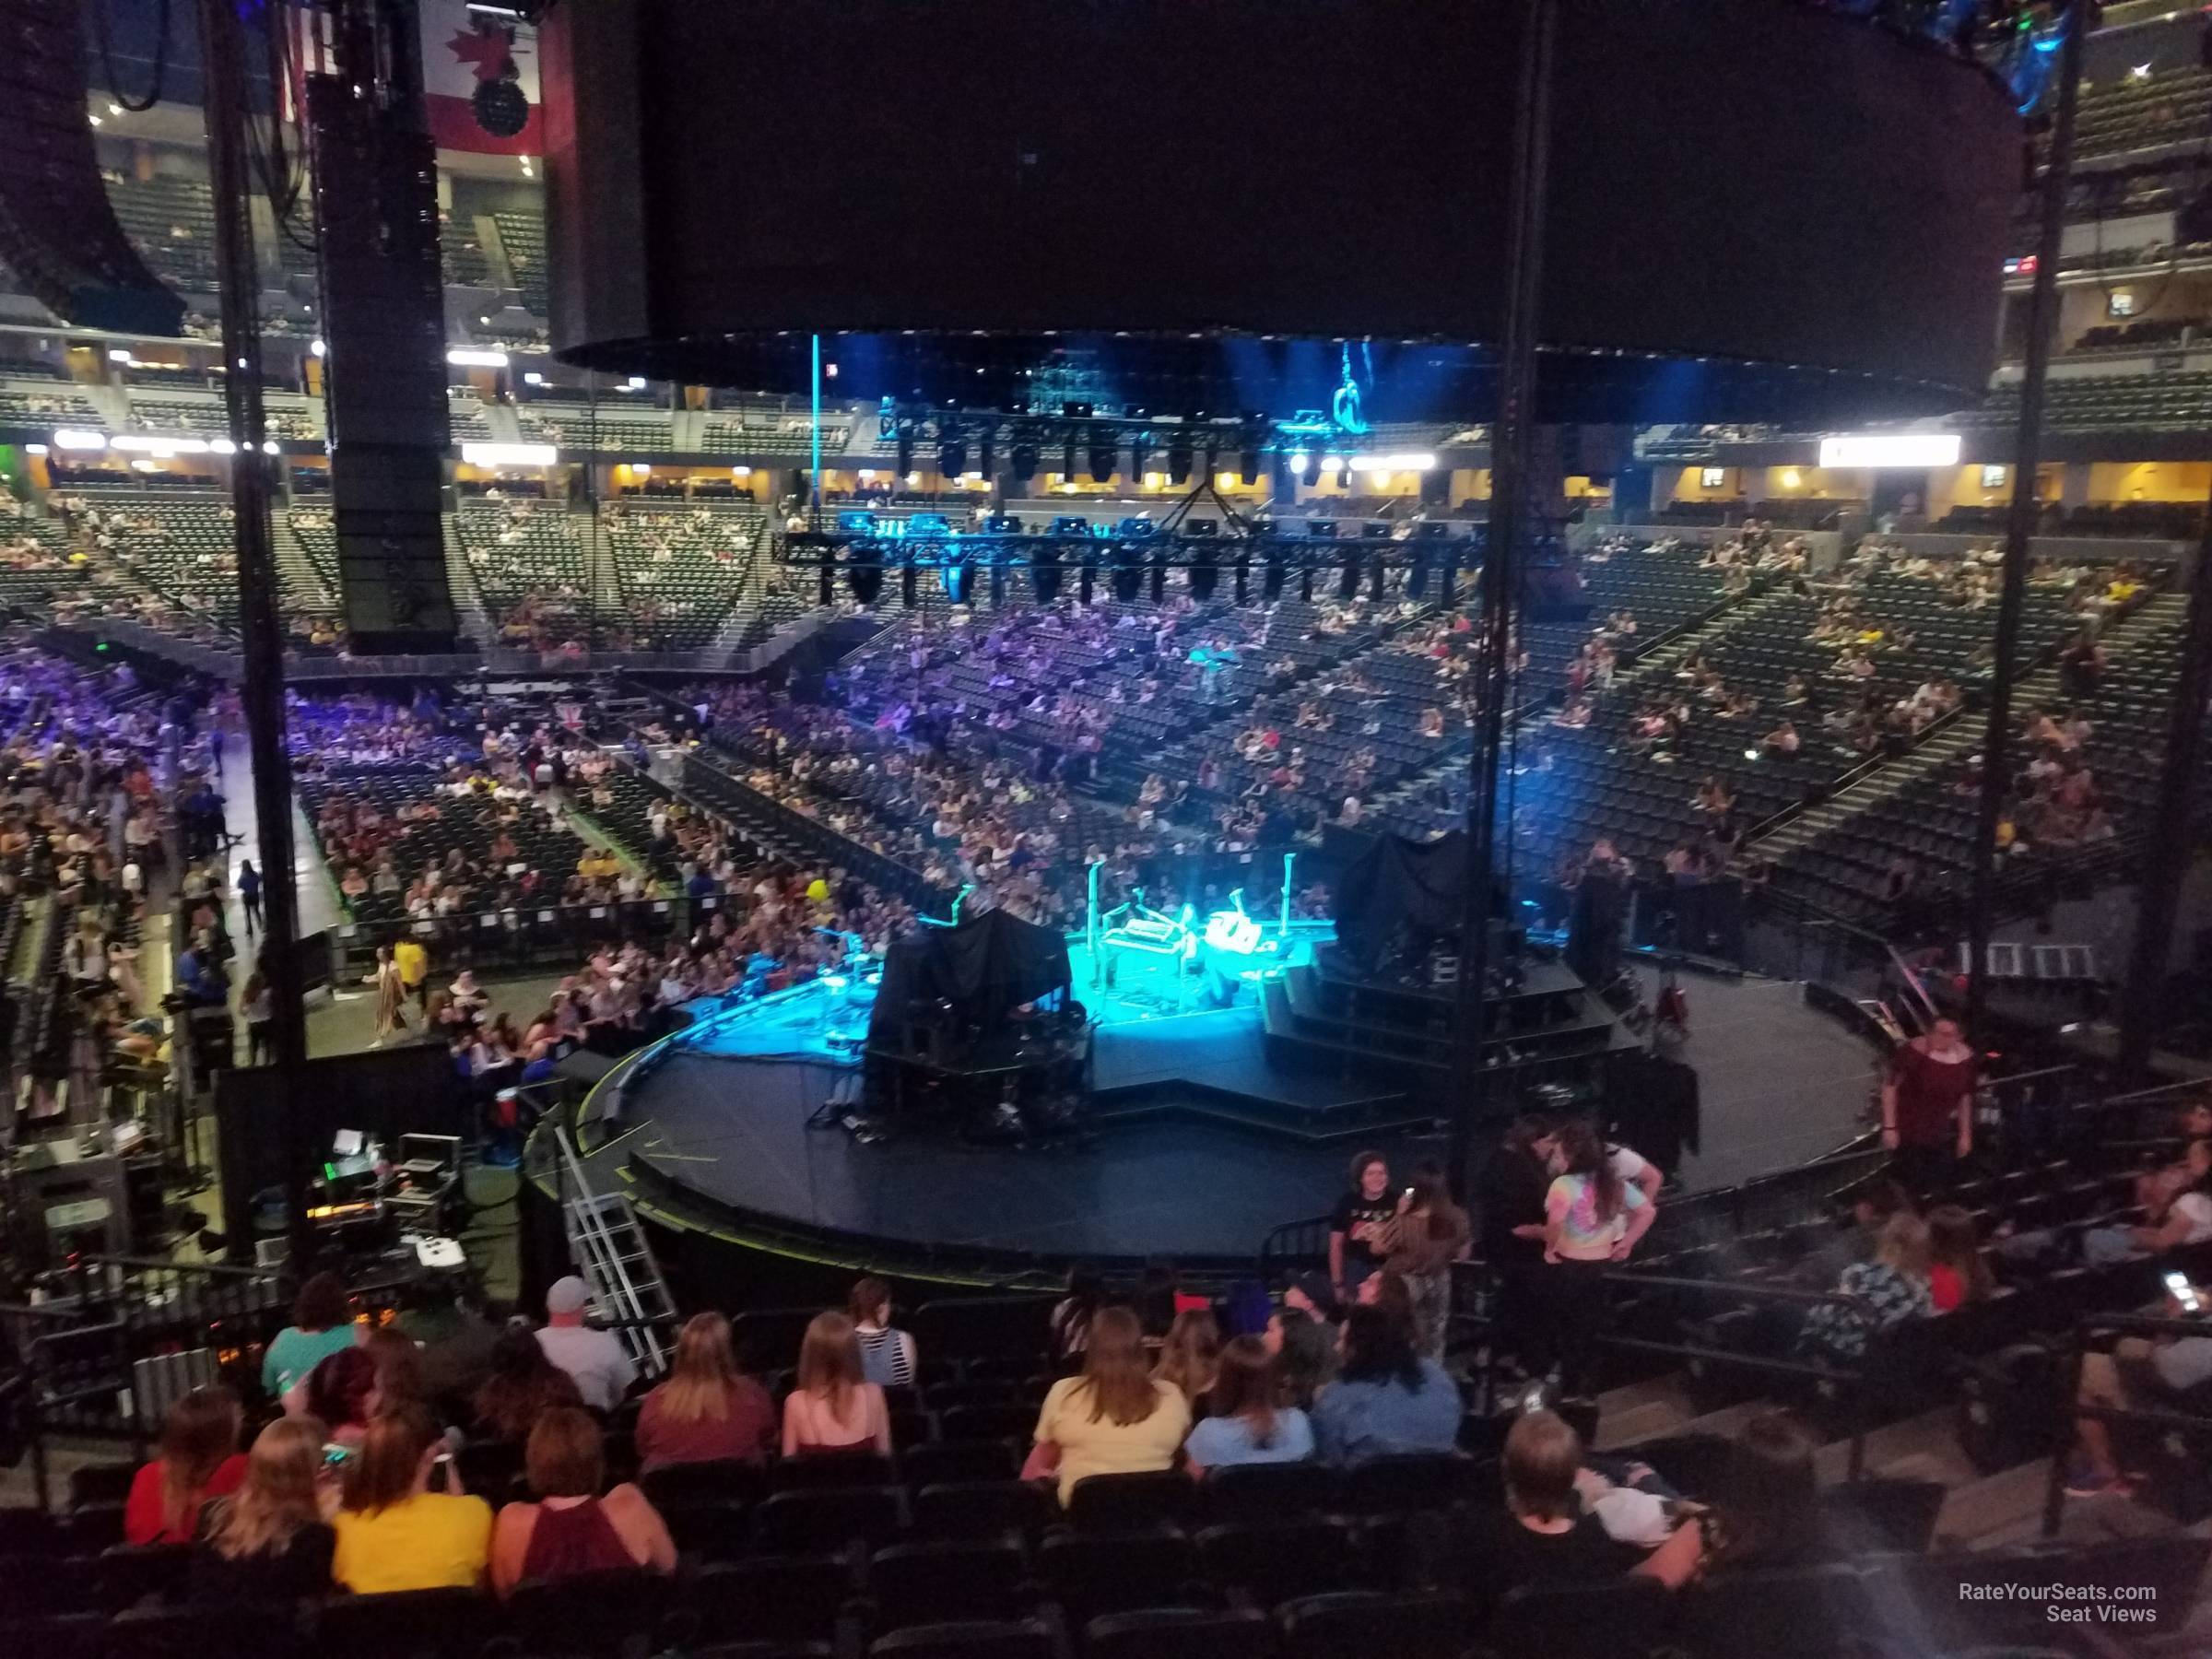 section 140, row 19 seat view  for concert - ball arena